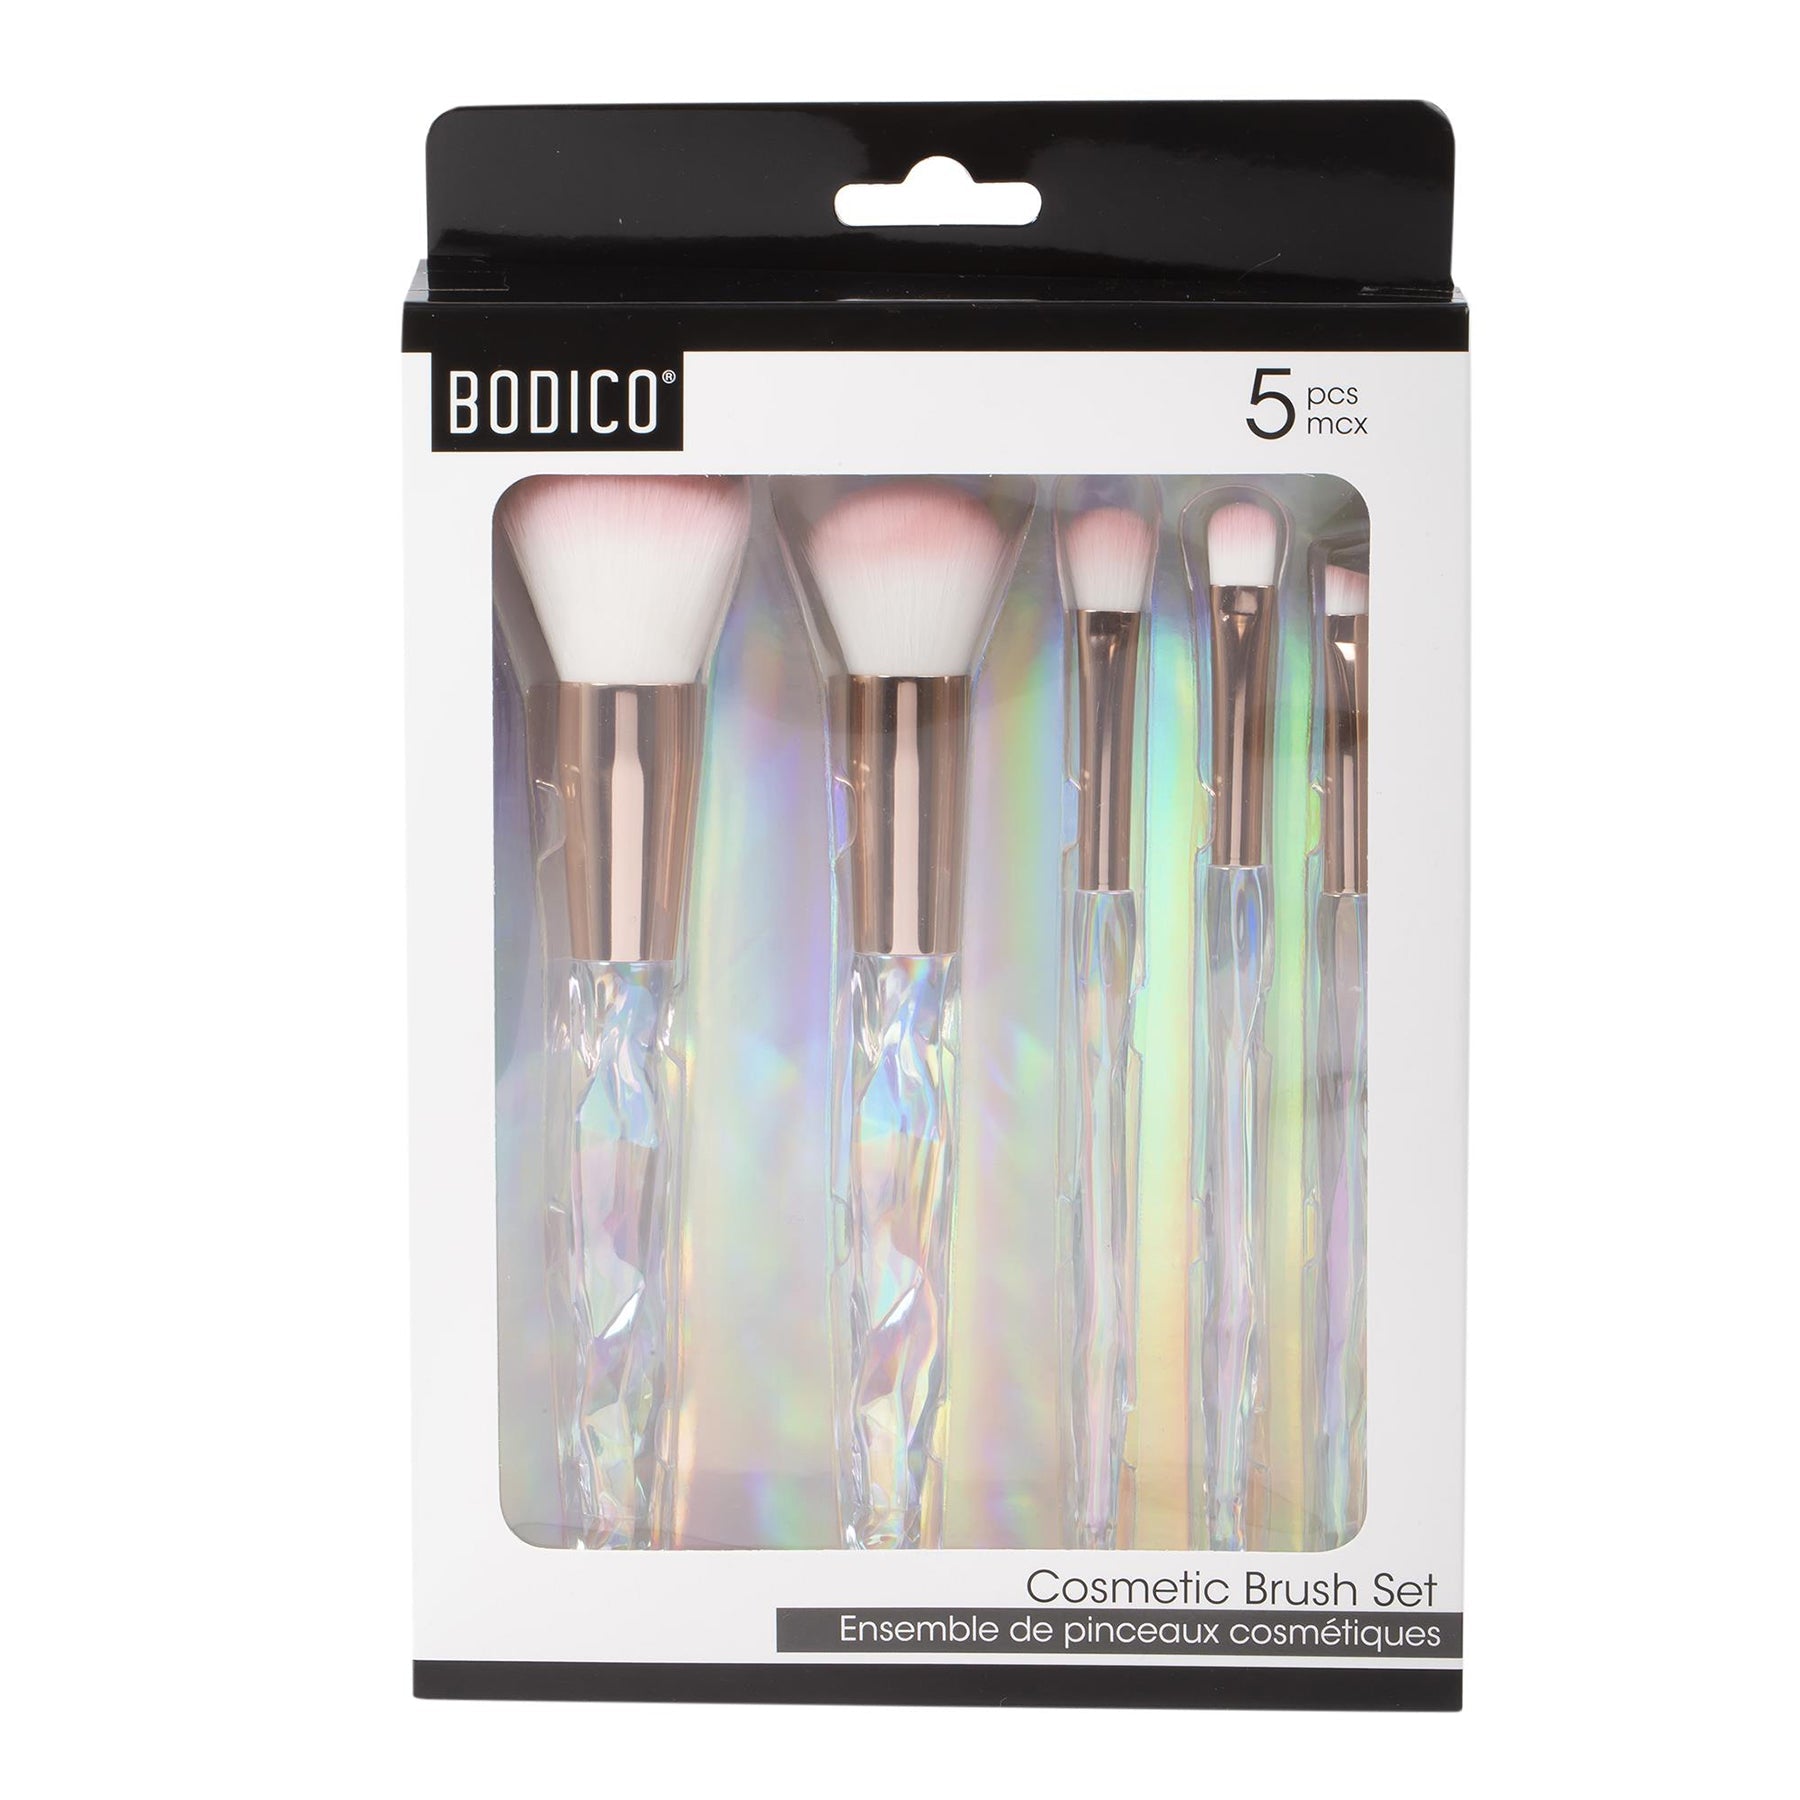 Bodico 5pcs Cosmetic Brush Set Holographic 6.5in each